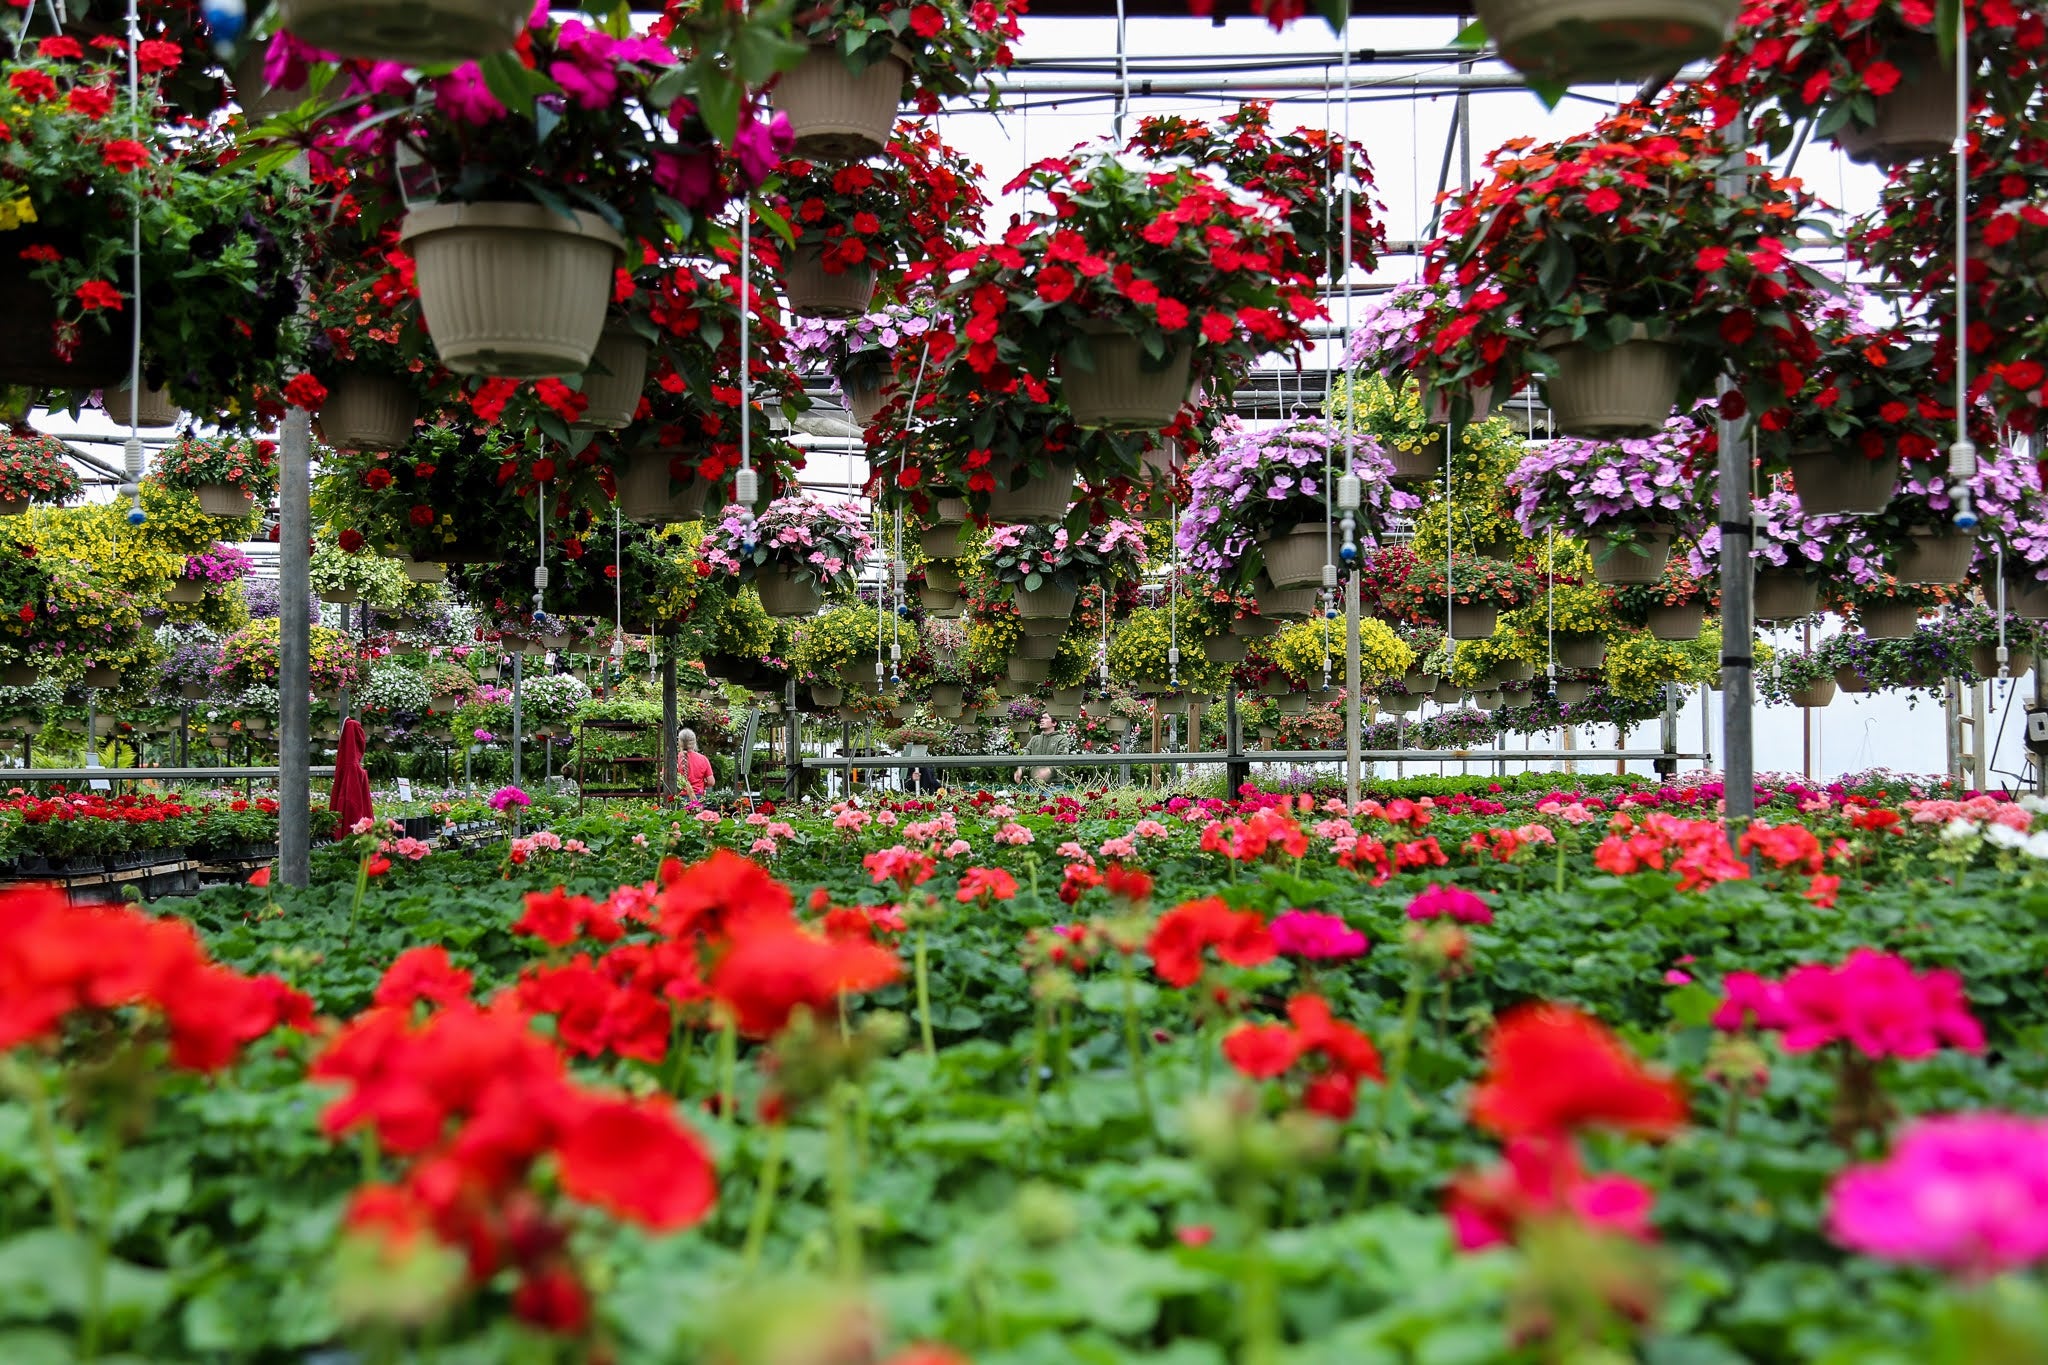 in line with a sea of geranium plants with large, bright, full bloom new guinea impatiens towering above.